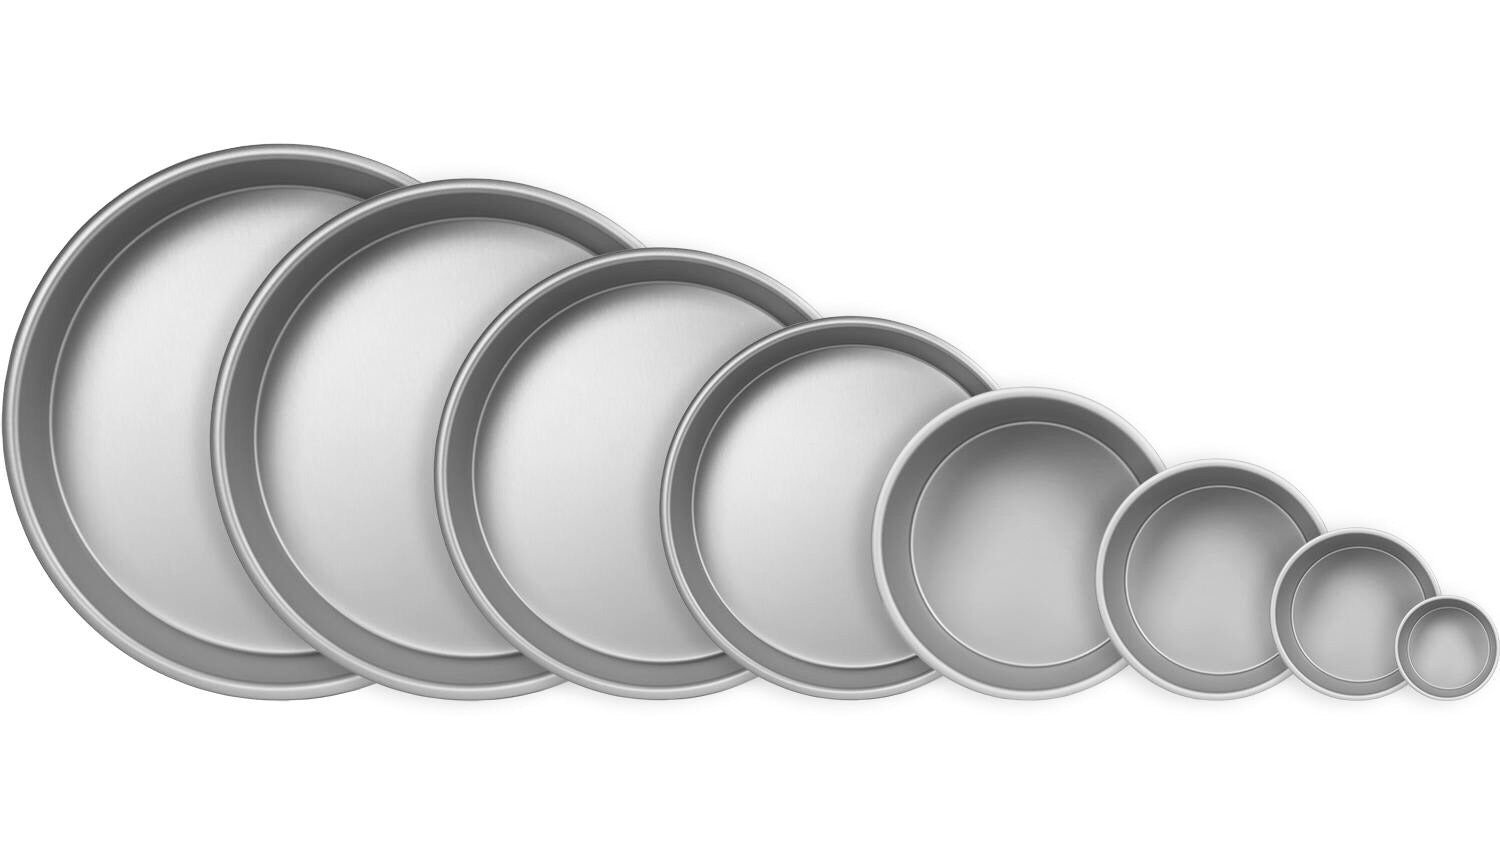 PME Rounded Cake Pans (3 in Height)